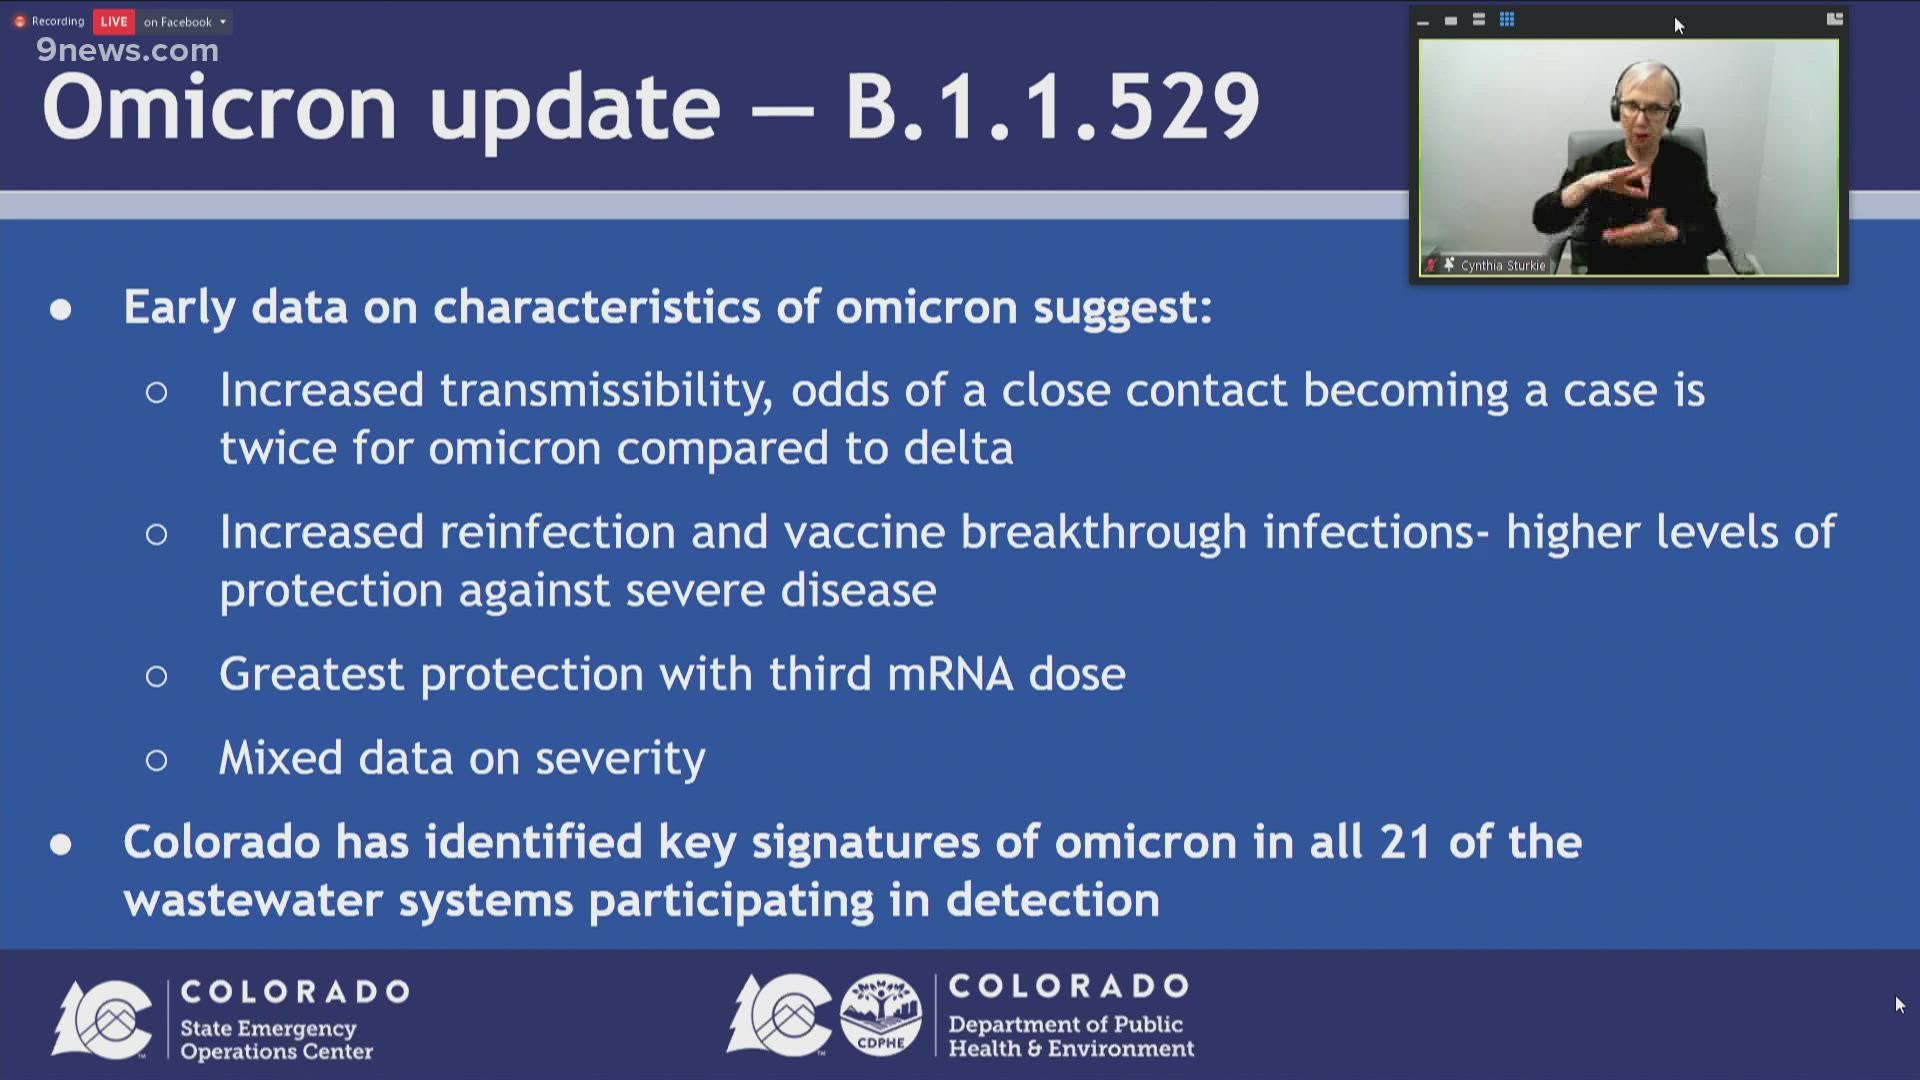 Health officials said Colorado is starting to see an increase in cases, and that it was likely being caused by the omicron variant.